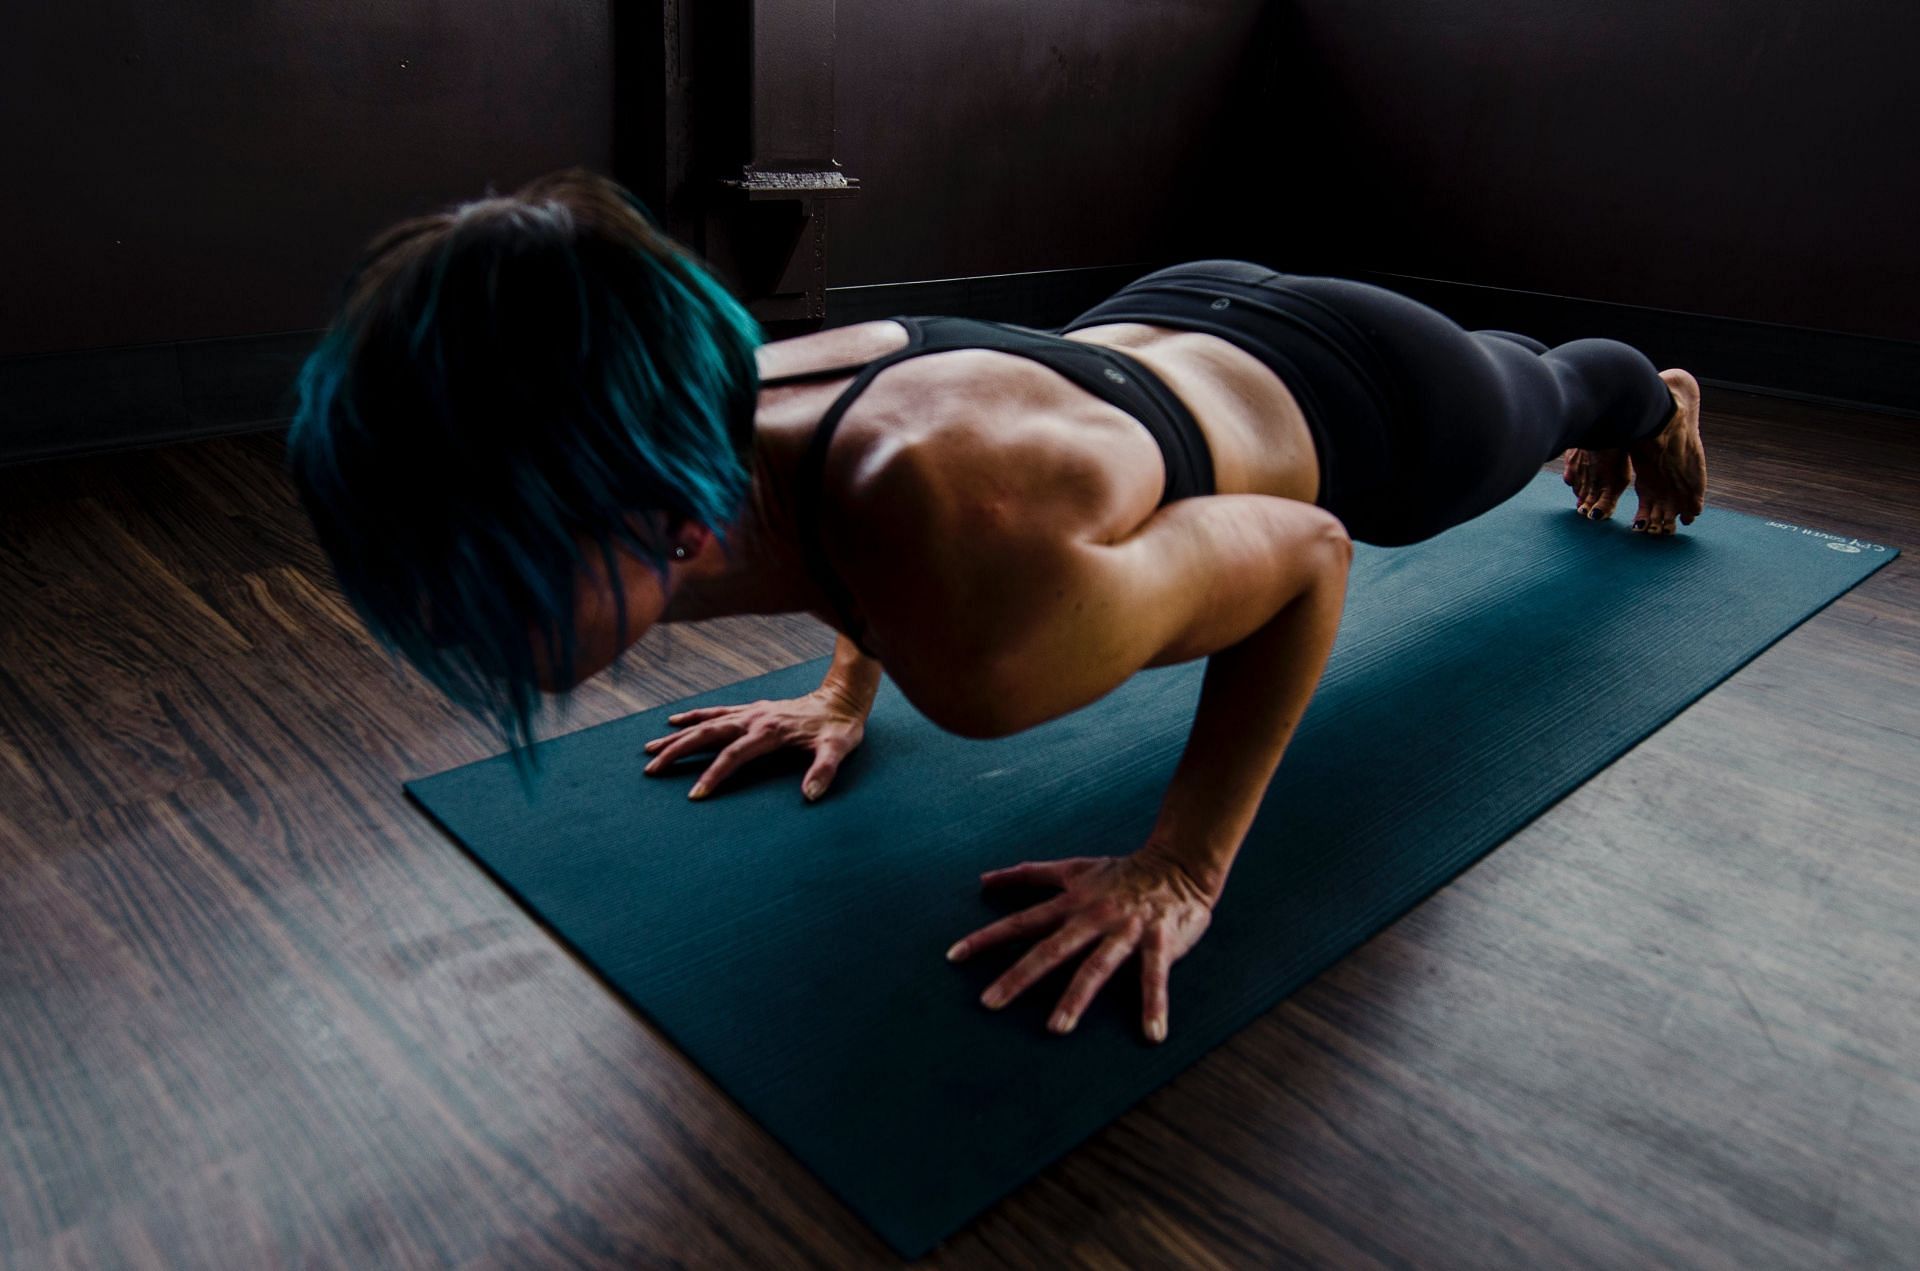 Importance of pushups (image sourced via Pexels / Photo by Karl)